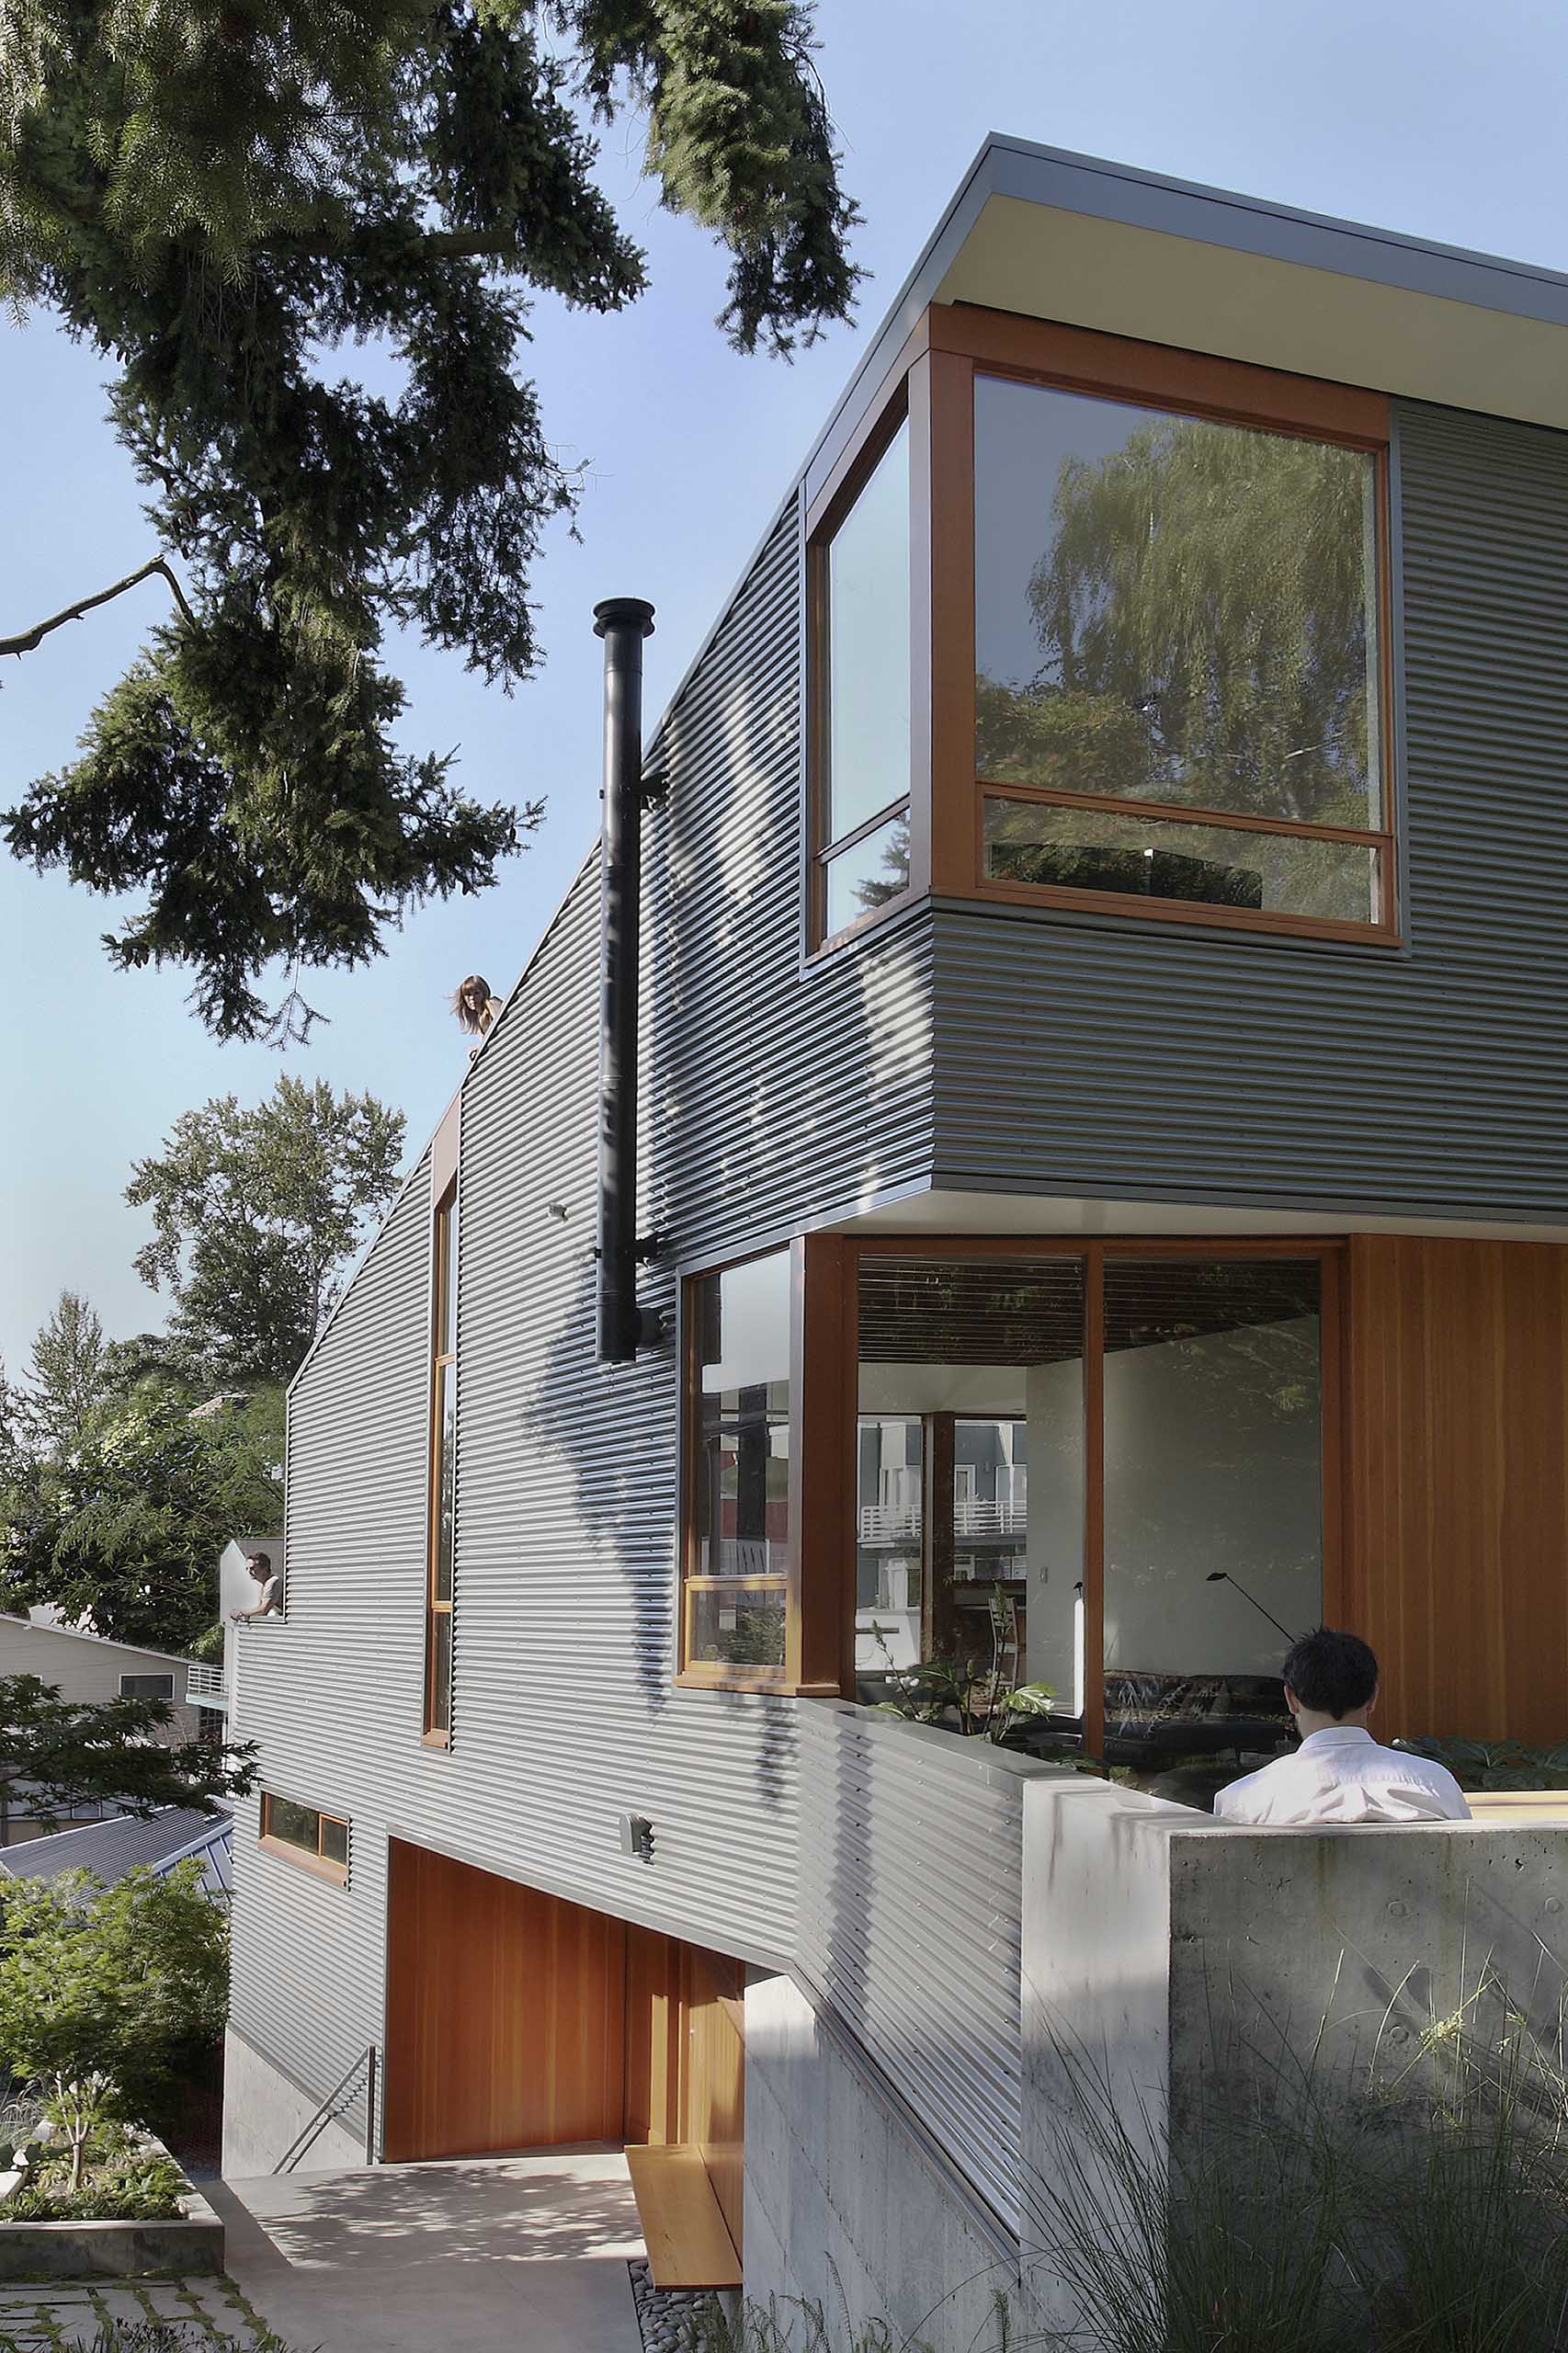 A house with corrugated metal siding and wood window frames.